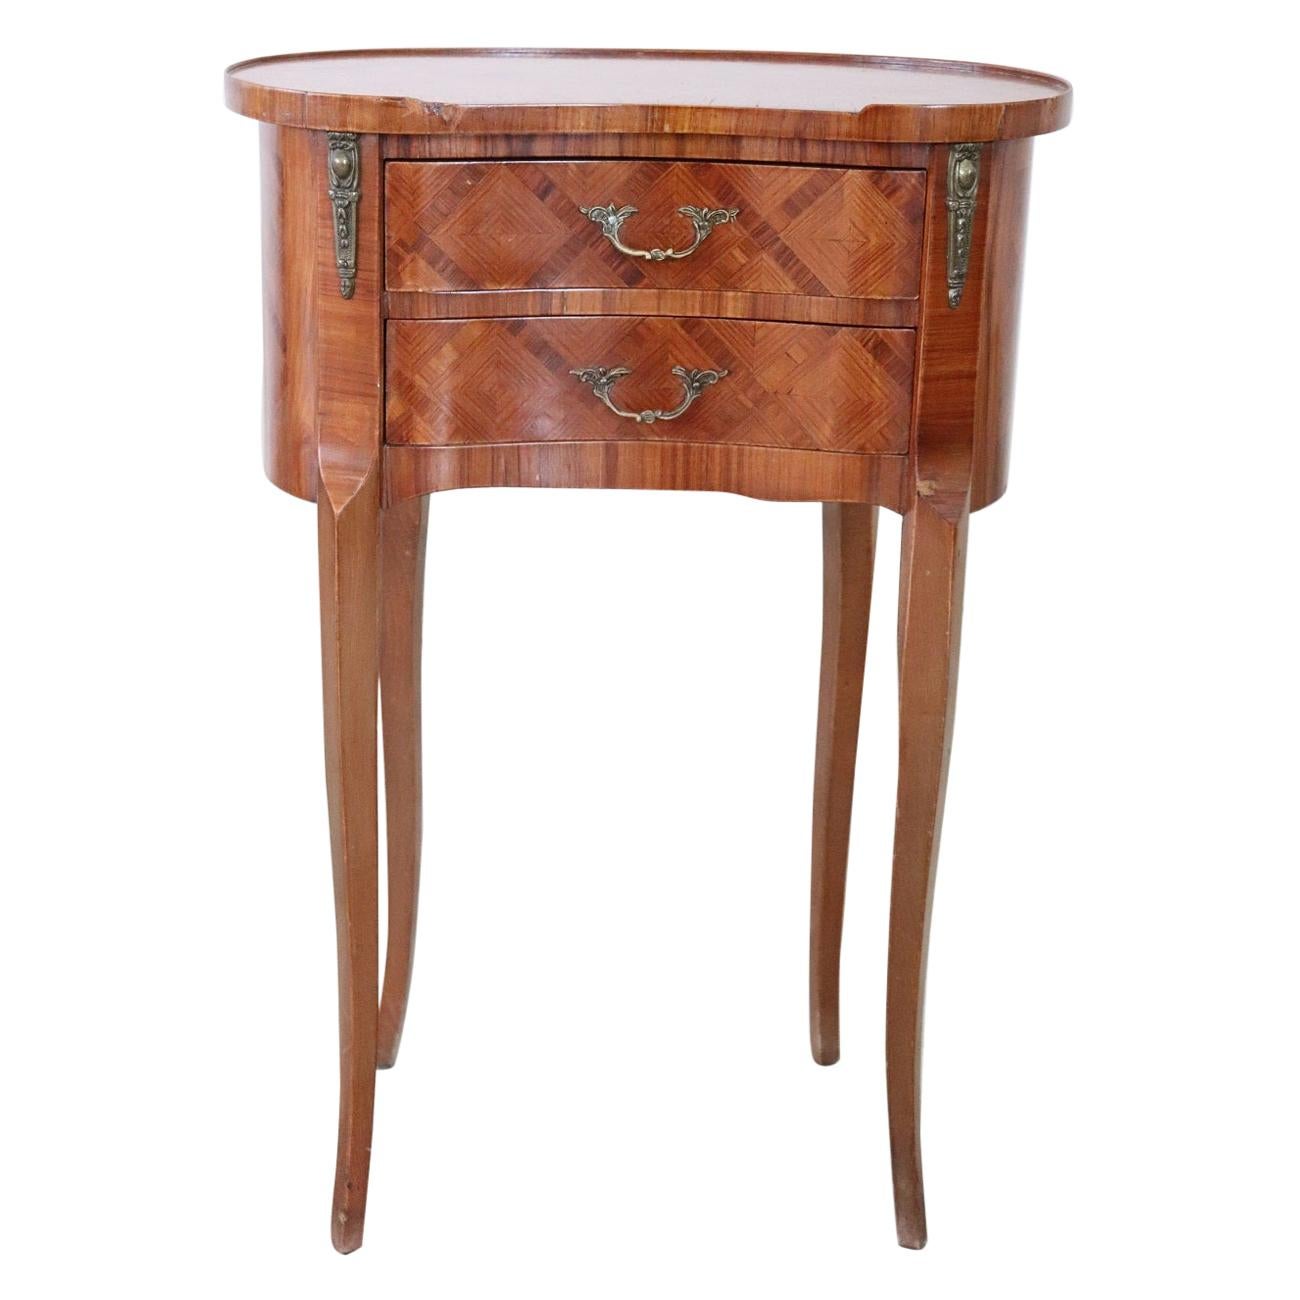 20th Century Italian Louis XV Style Inlay Wood Side Table or Nightstand